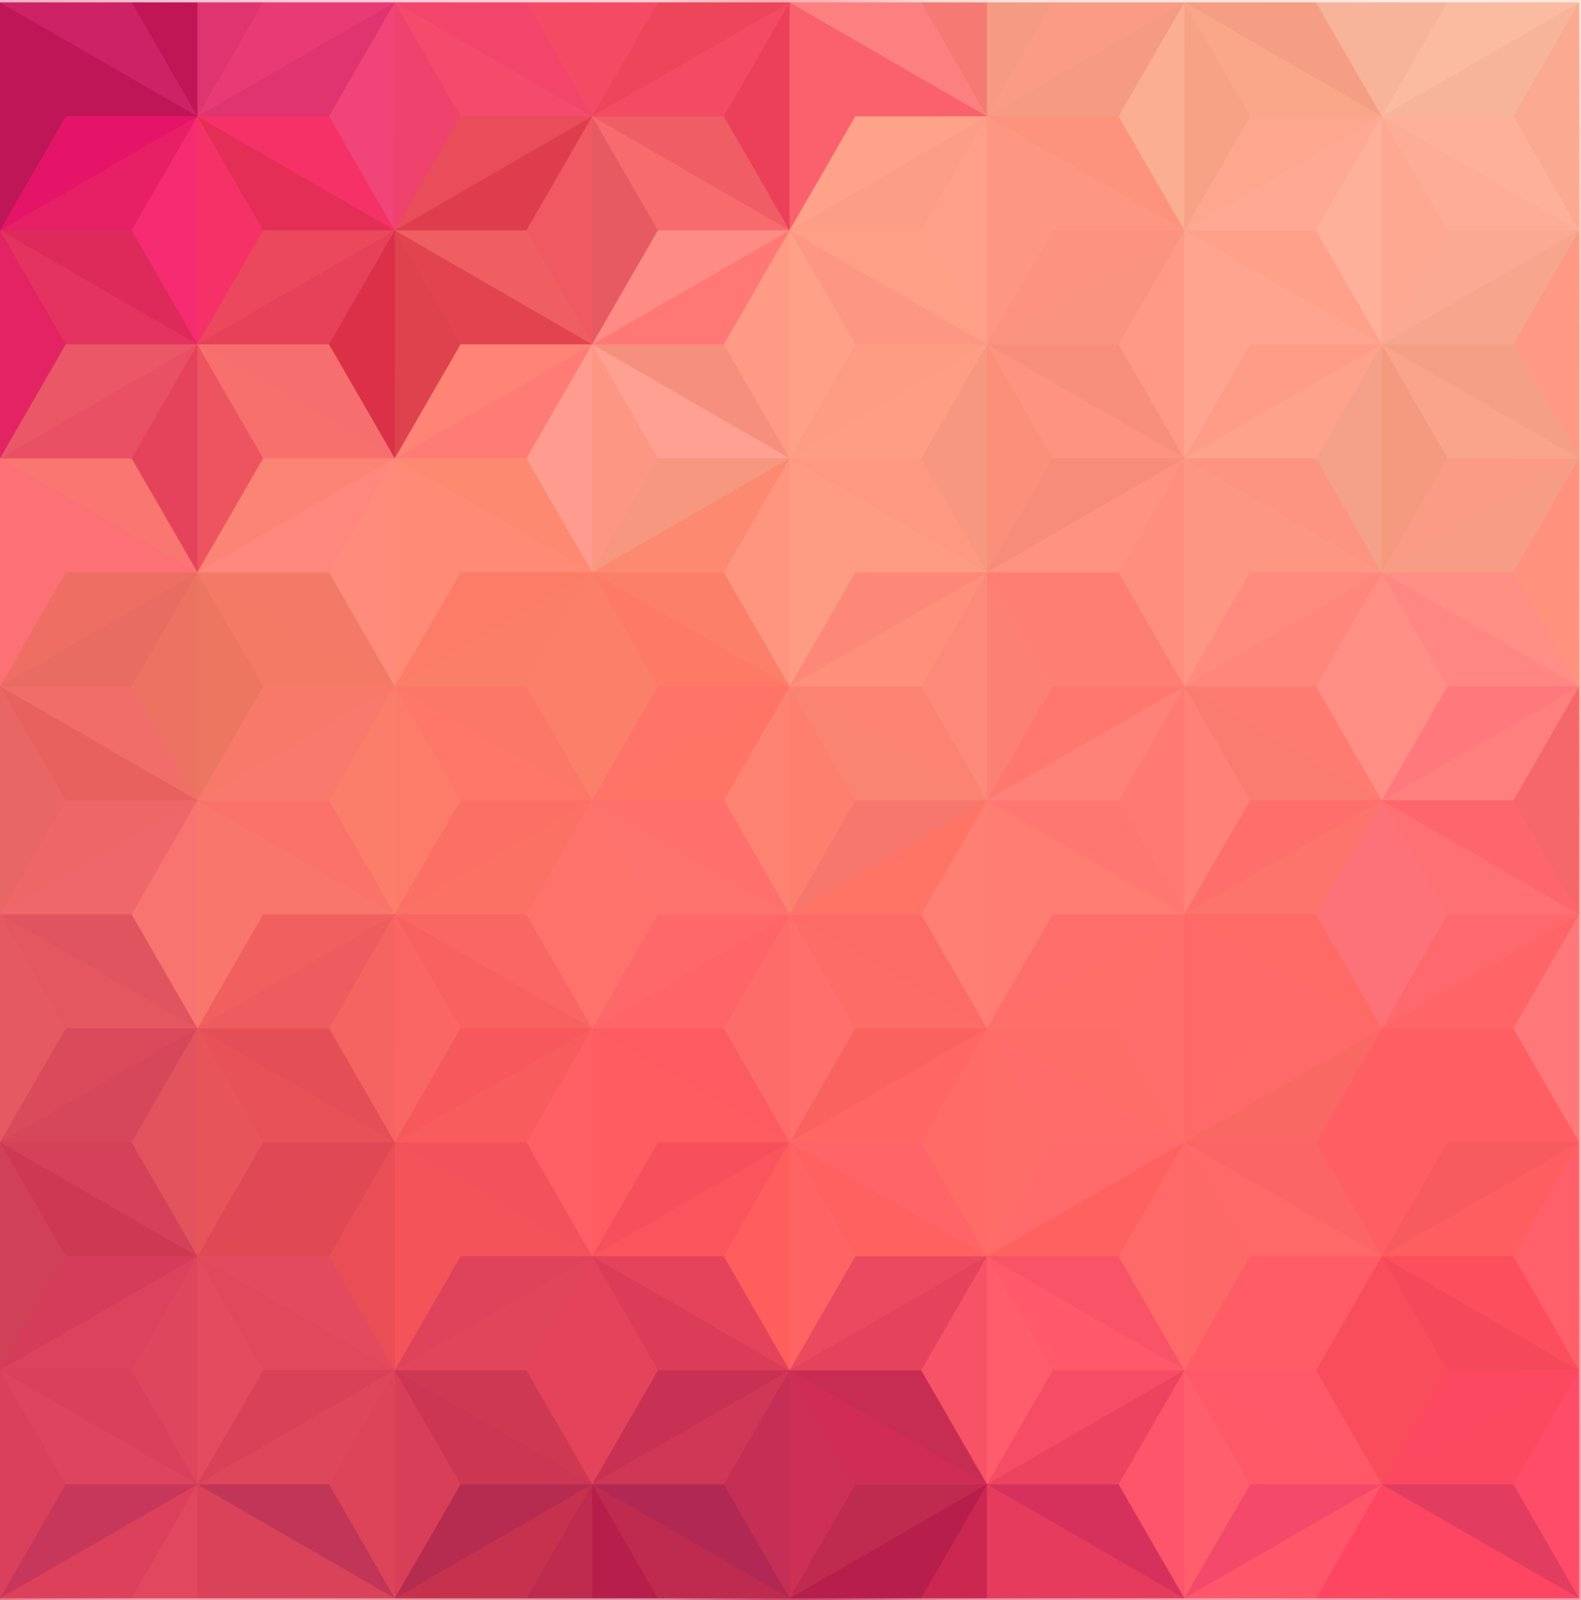 Abstract Geometrical Background by epic33